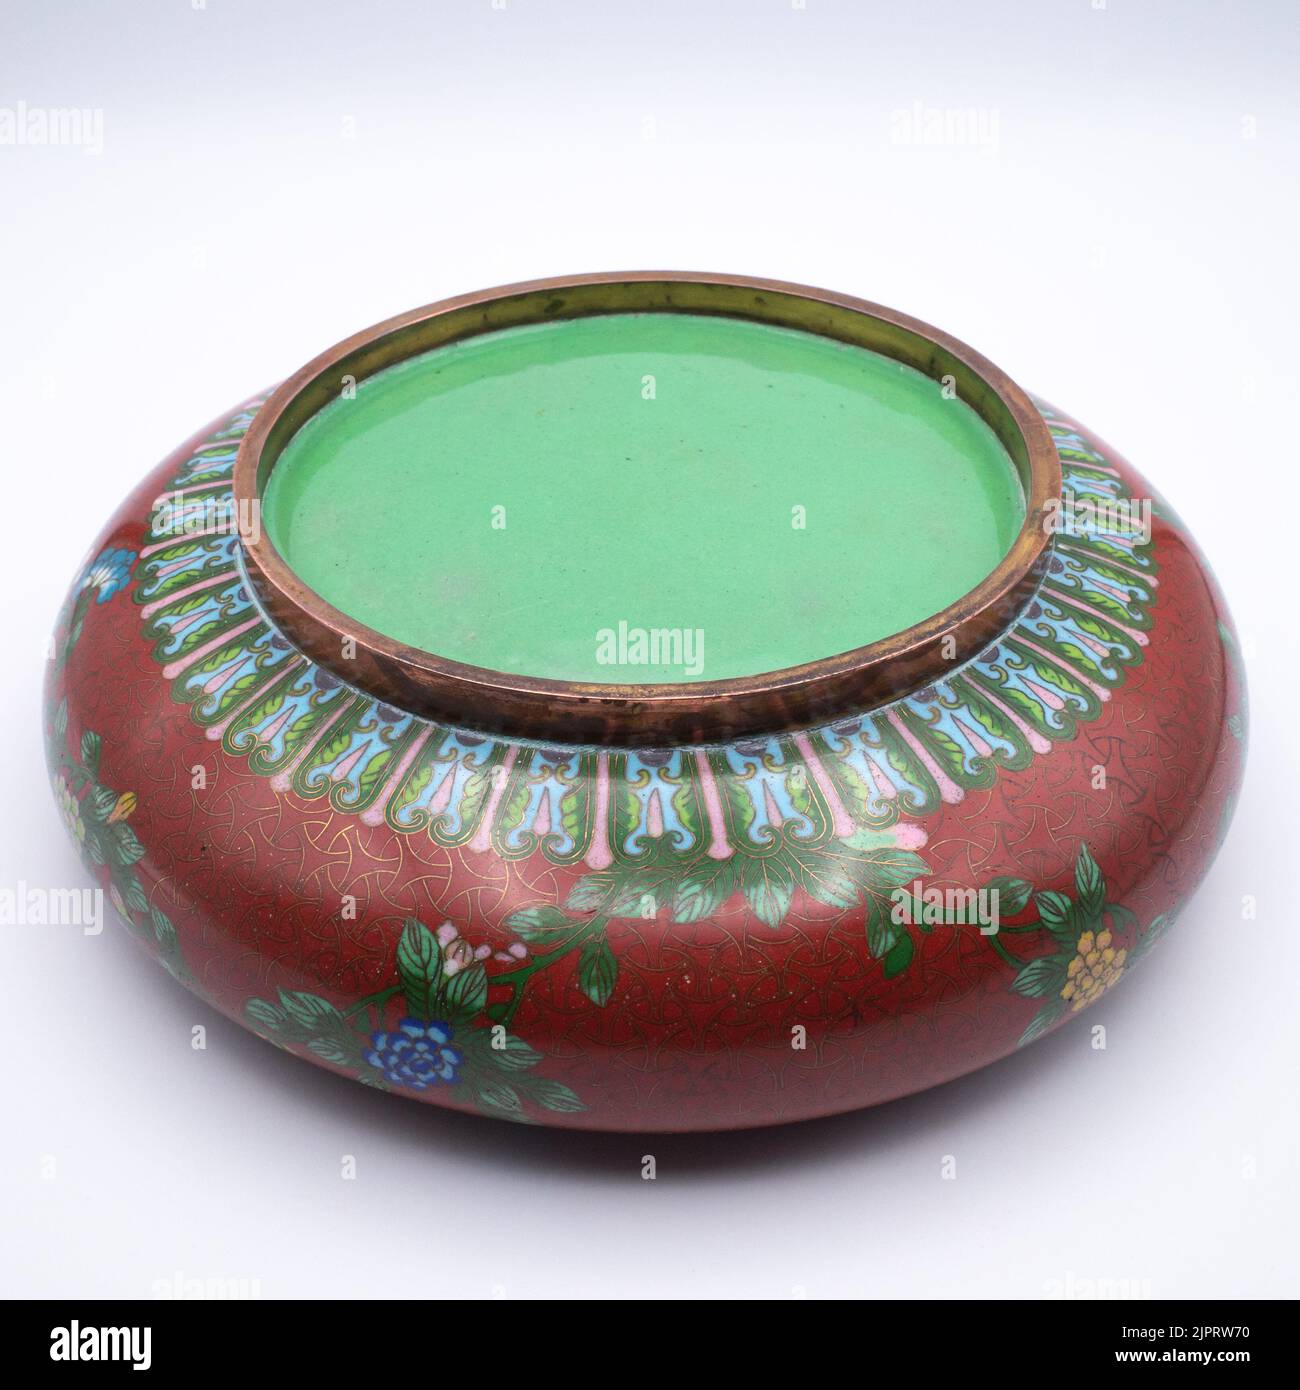 Fine Antique Chinese Red Cloisonne Brush Washer Bowl With Floral Decoration Stock Photo